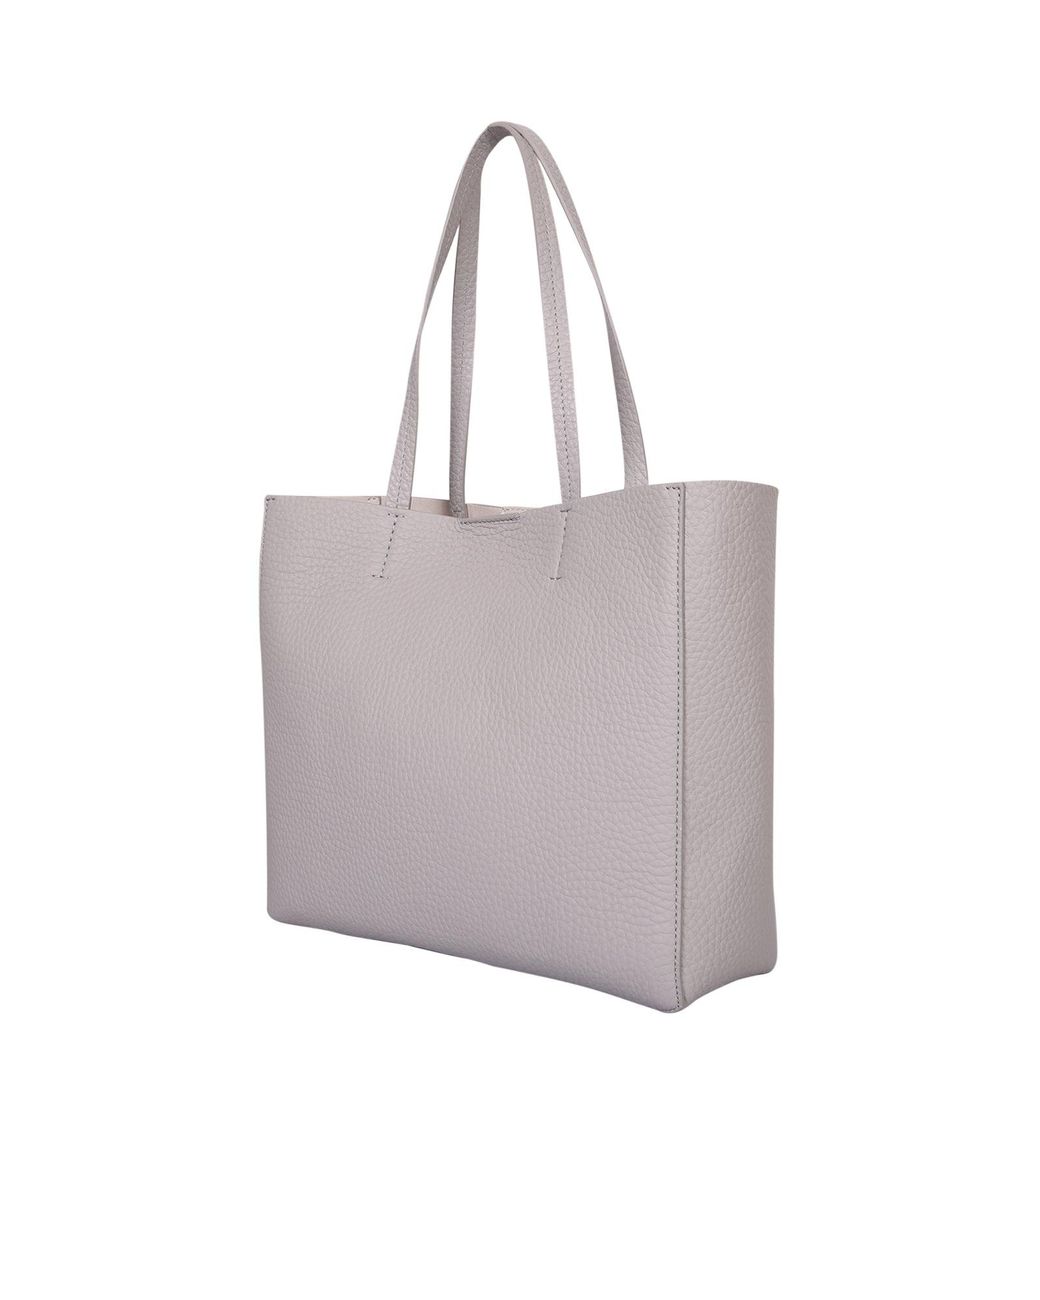 Orciani Le Sac Soft Small Bag in Grey | Lyst Canada